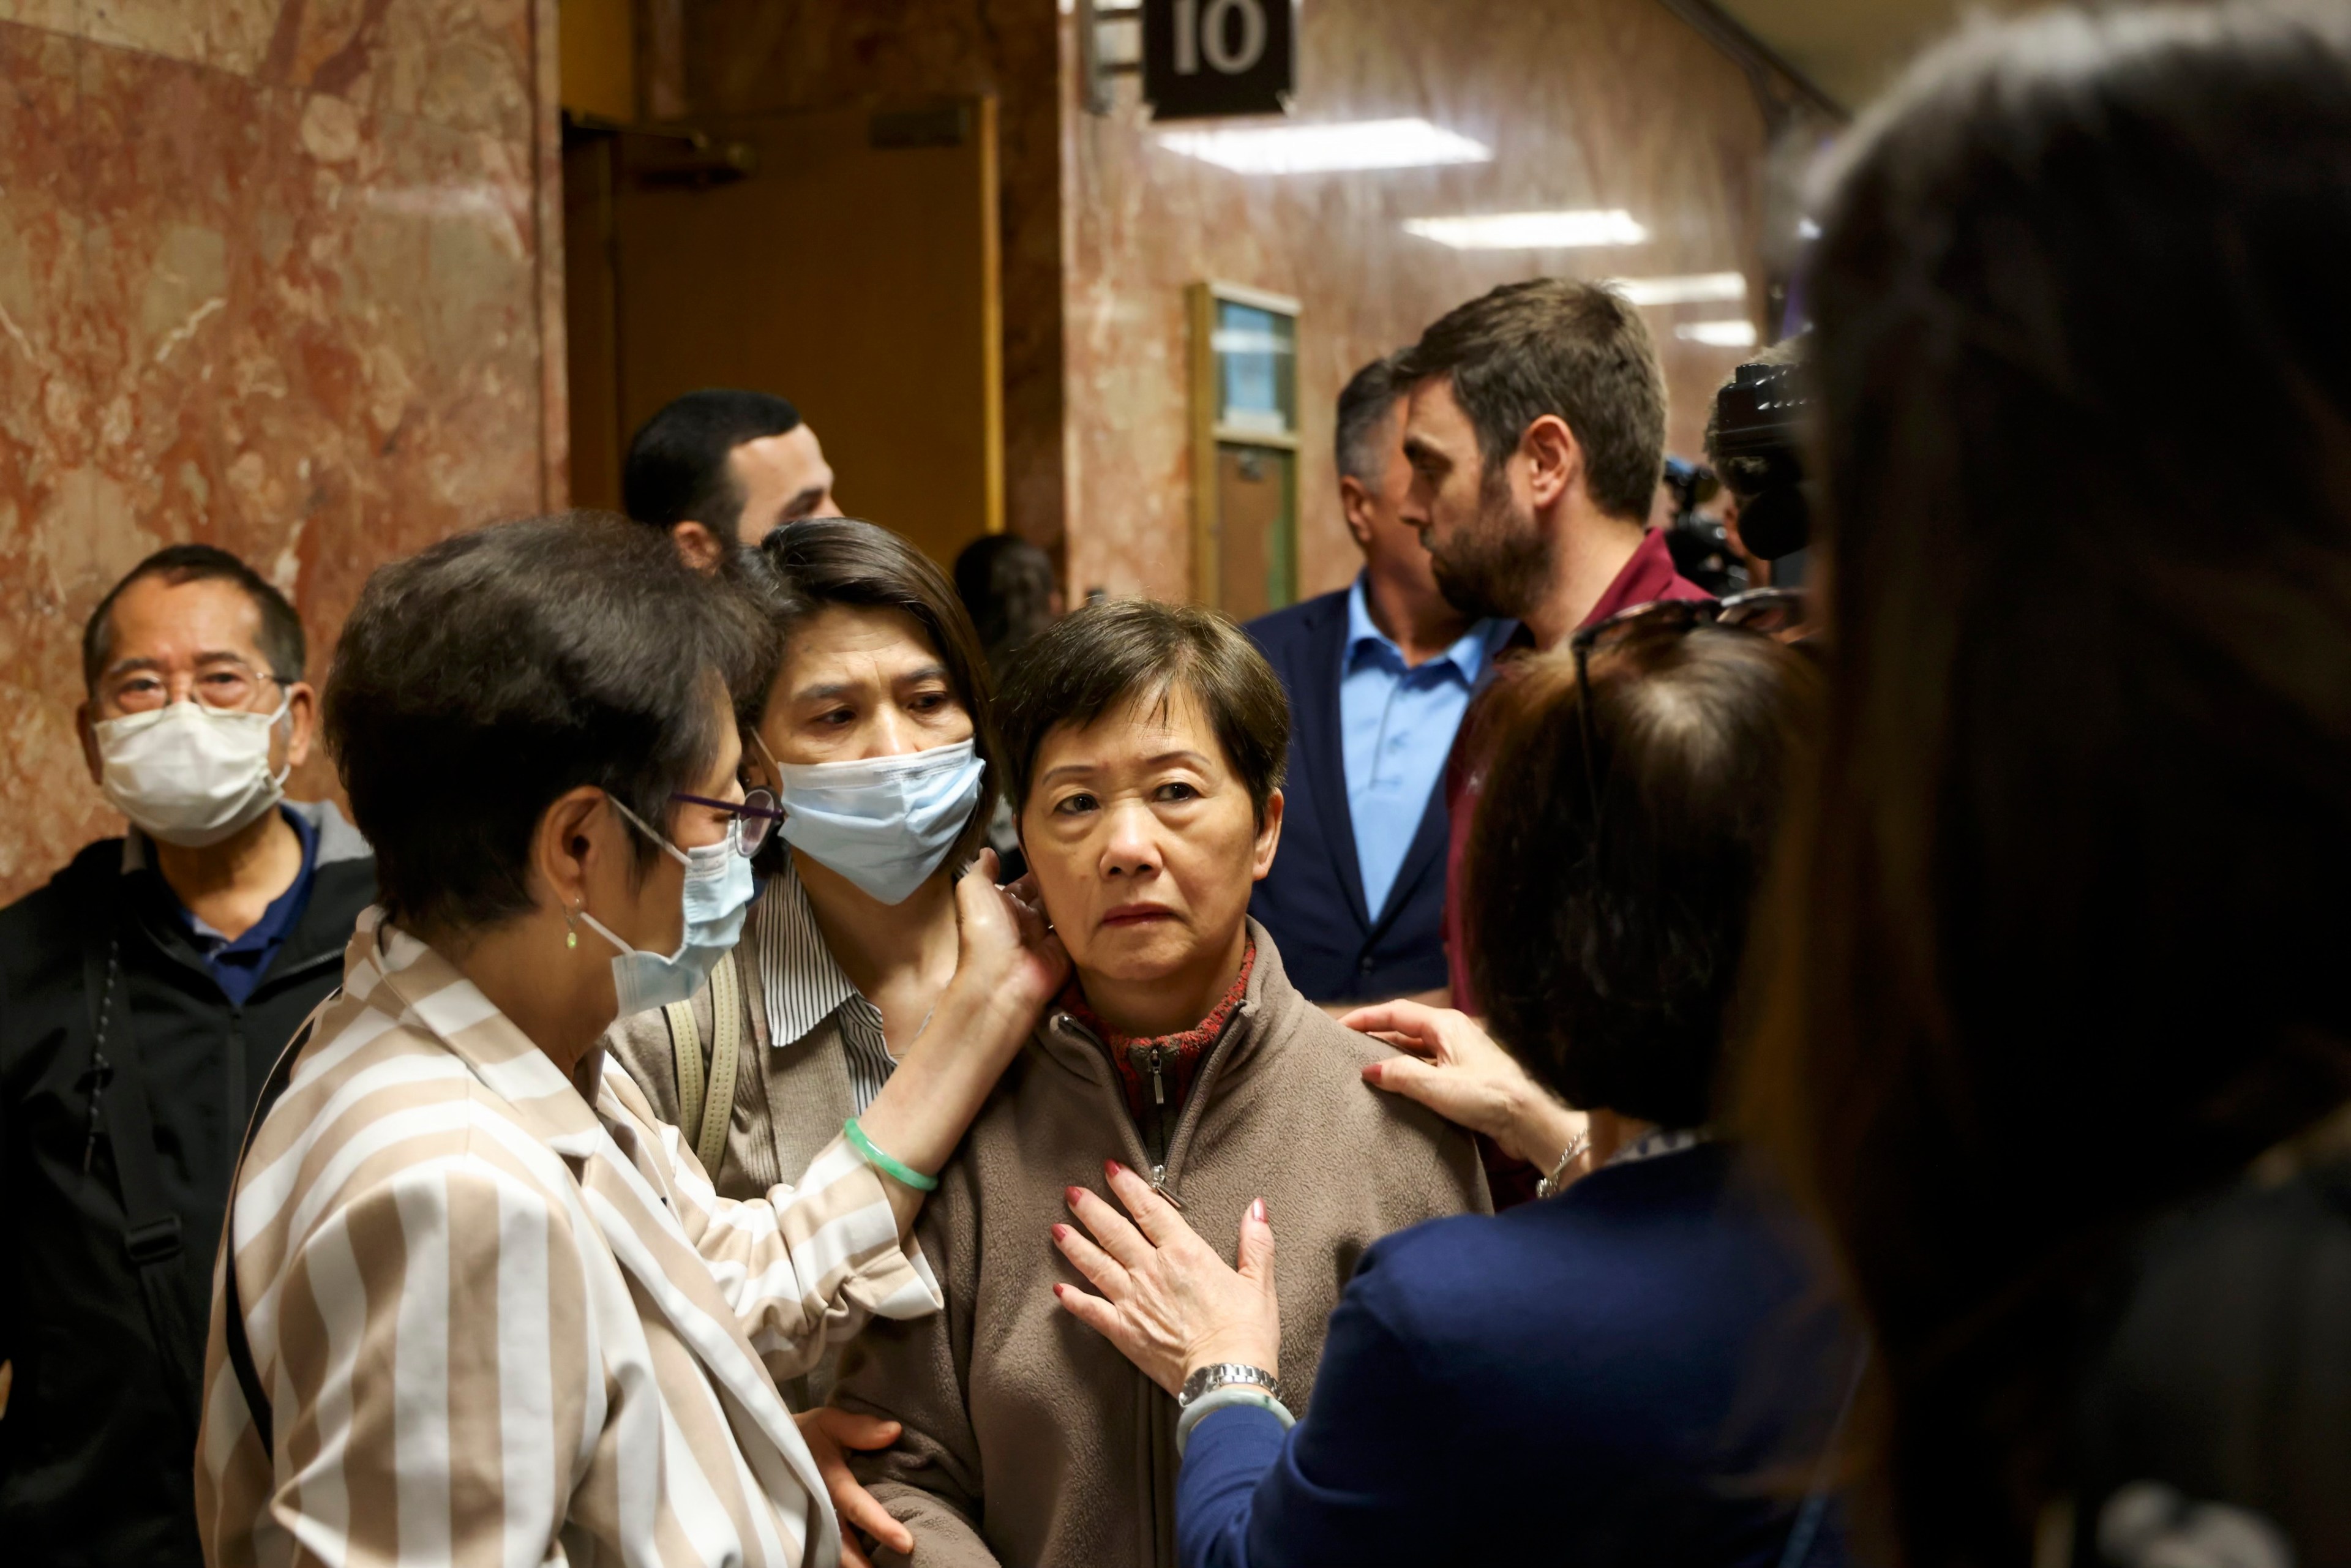 A woman wearing a mask that covers her mouth and nose caresses the face of a woman in a crowded hallway outside of a courtroom.